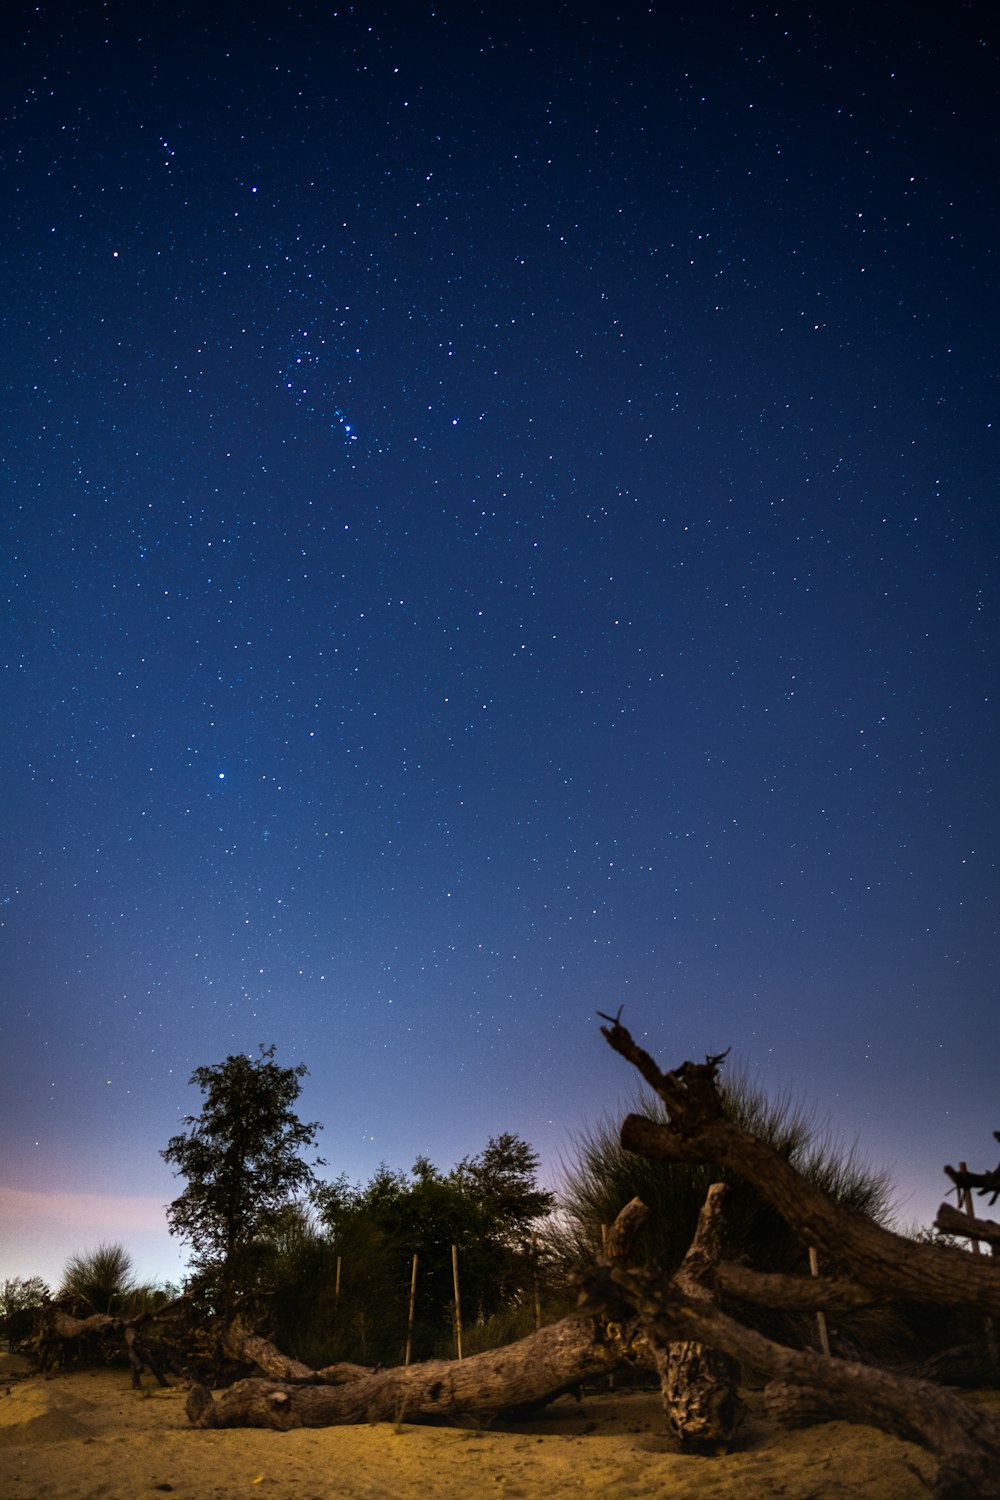 the night sky is full of stars above a tree stump